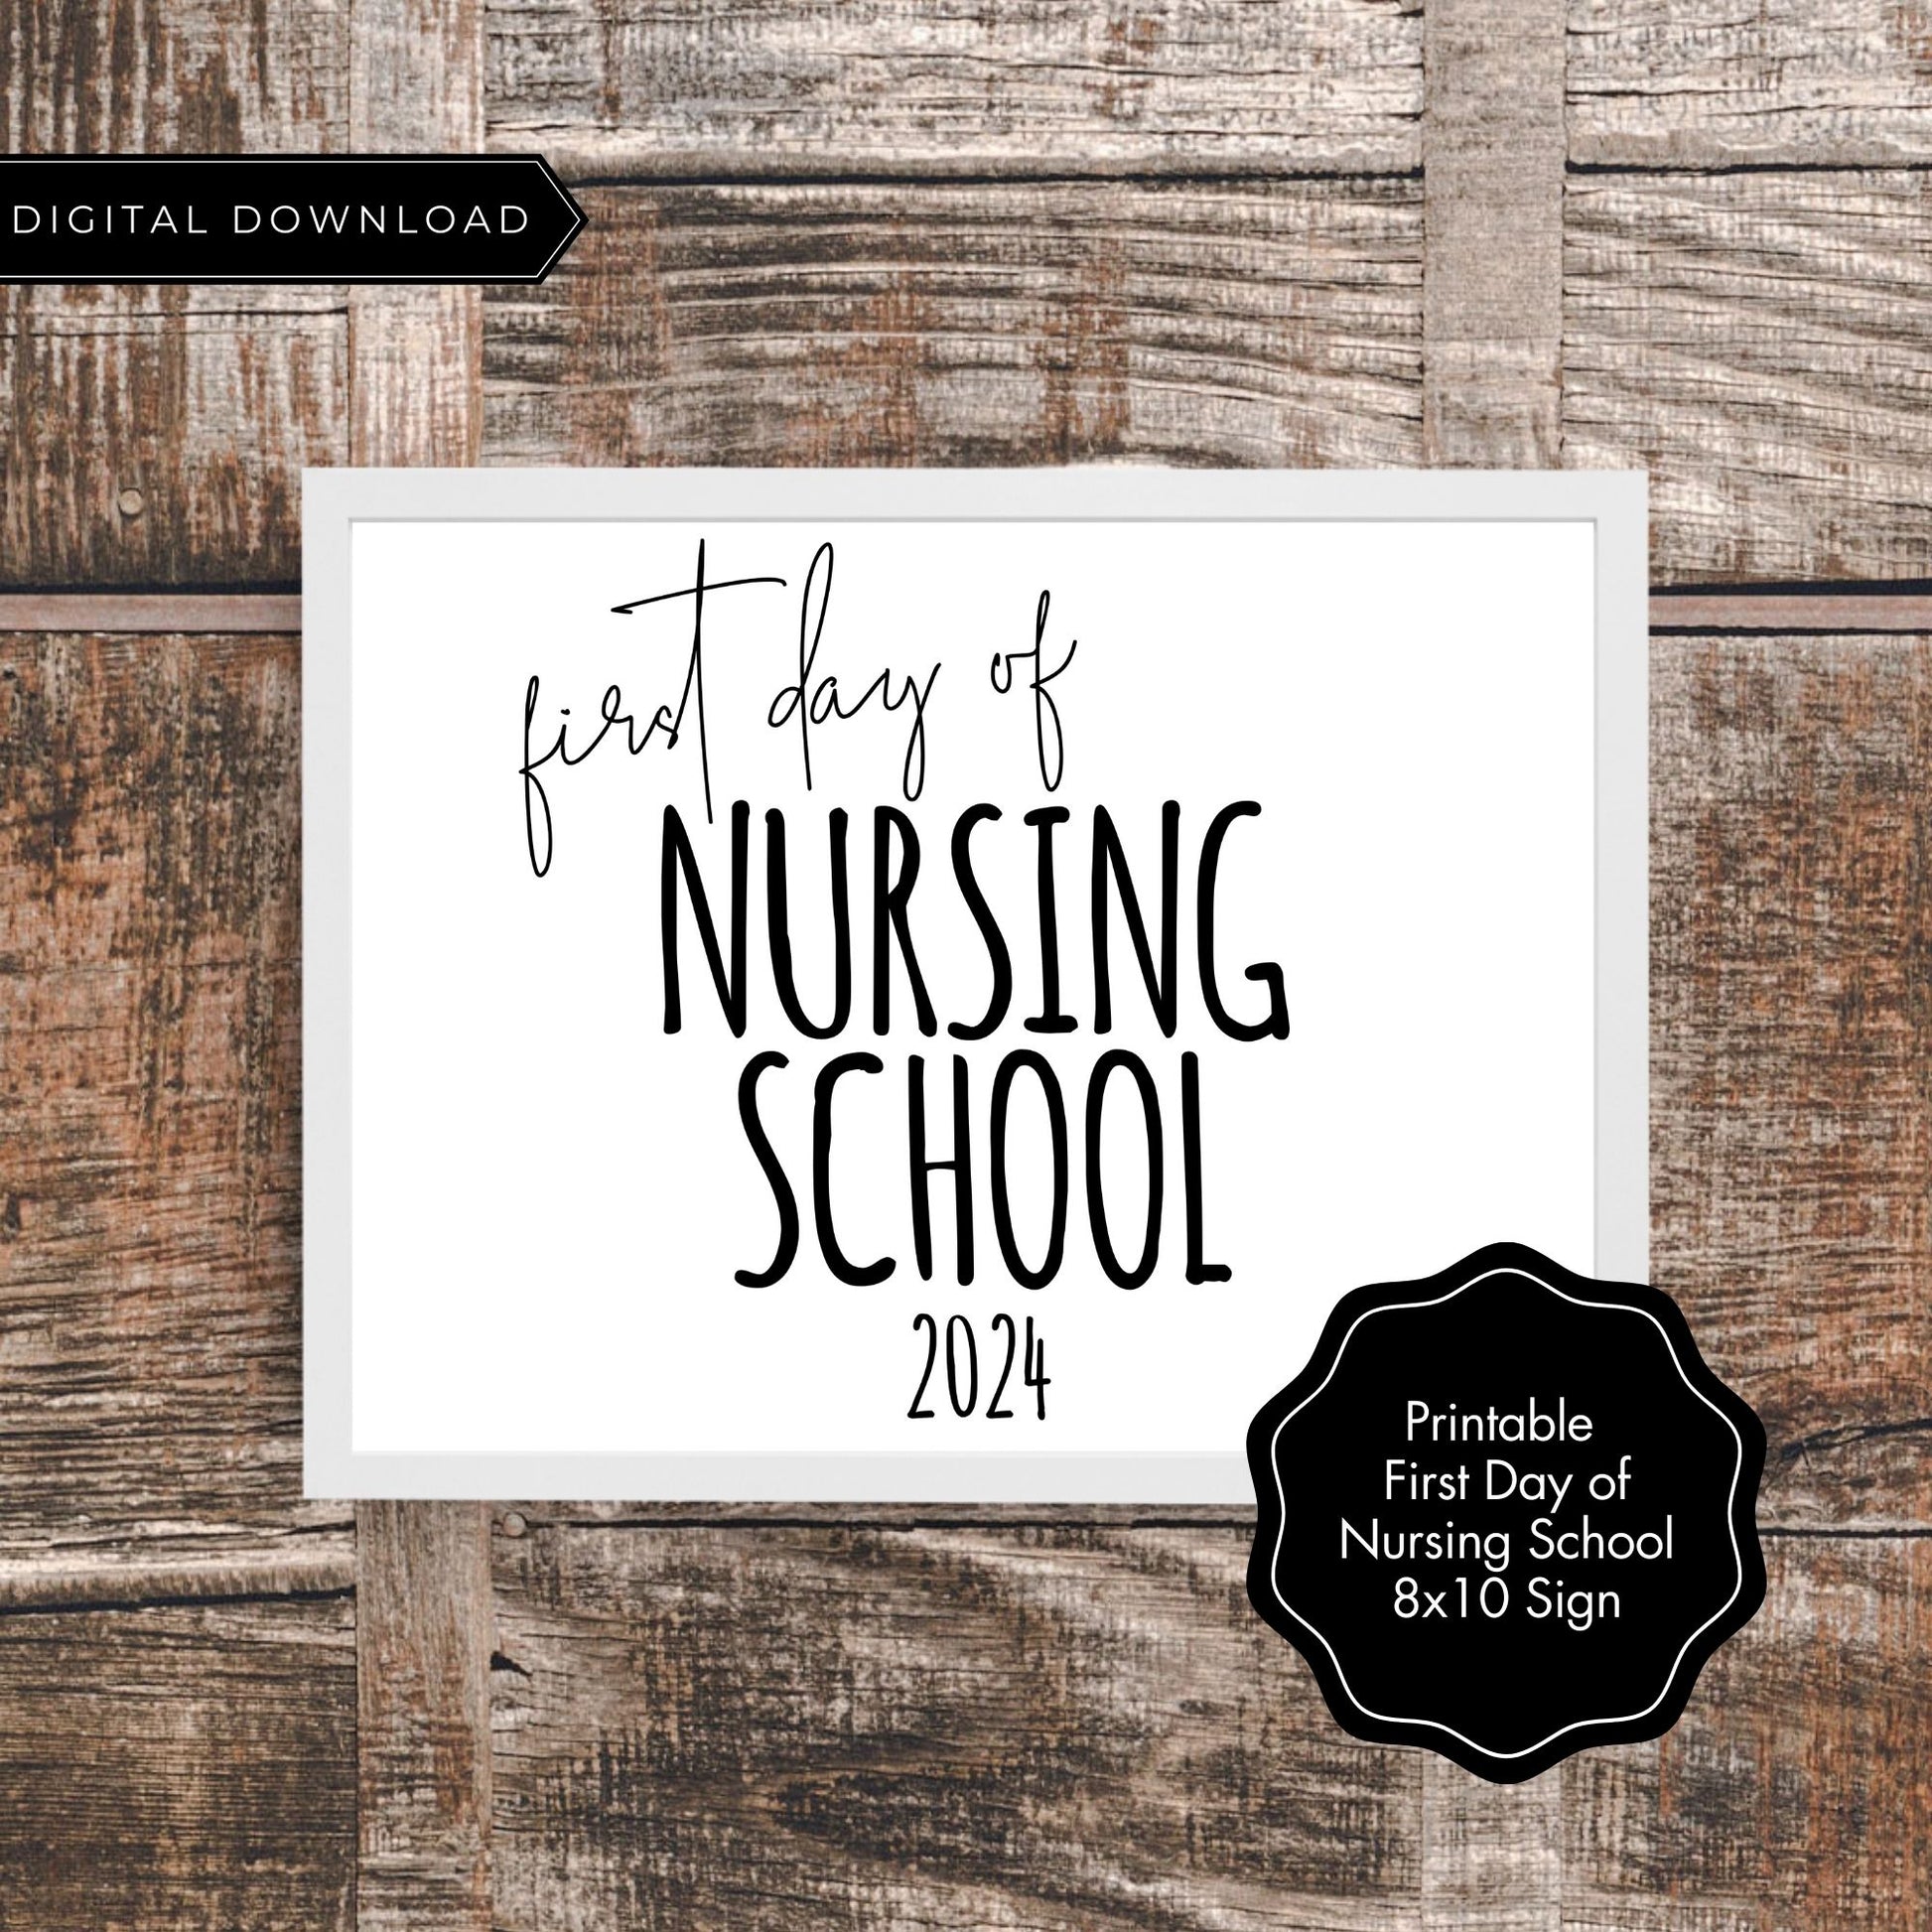 First Day of Nursing School Printable Sign 8x10